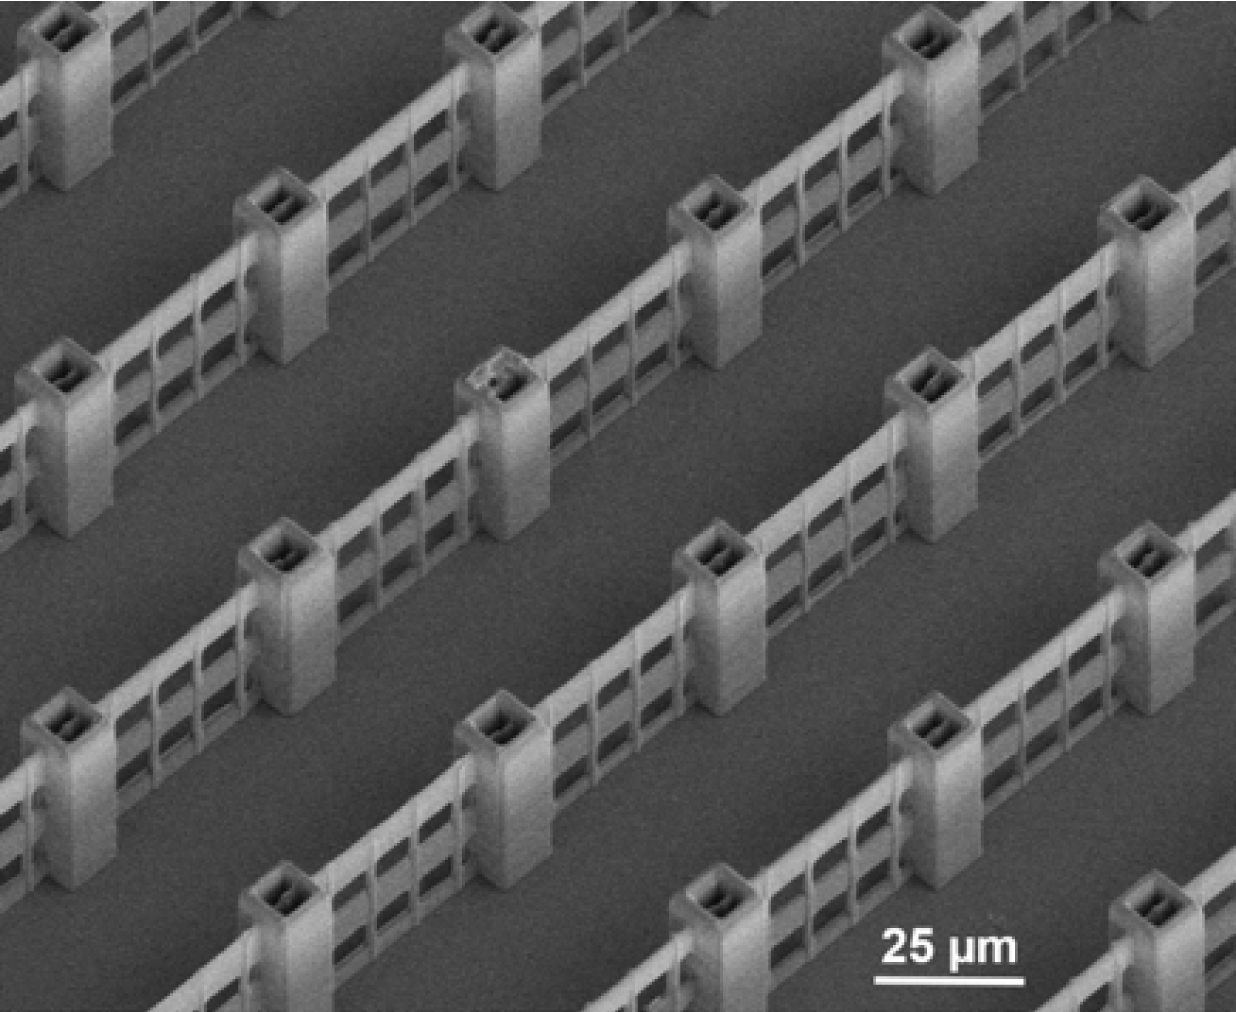 Speeding up 3D microfabrication for bio-applications